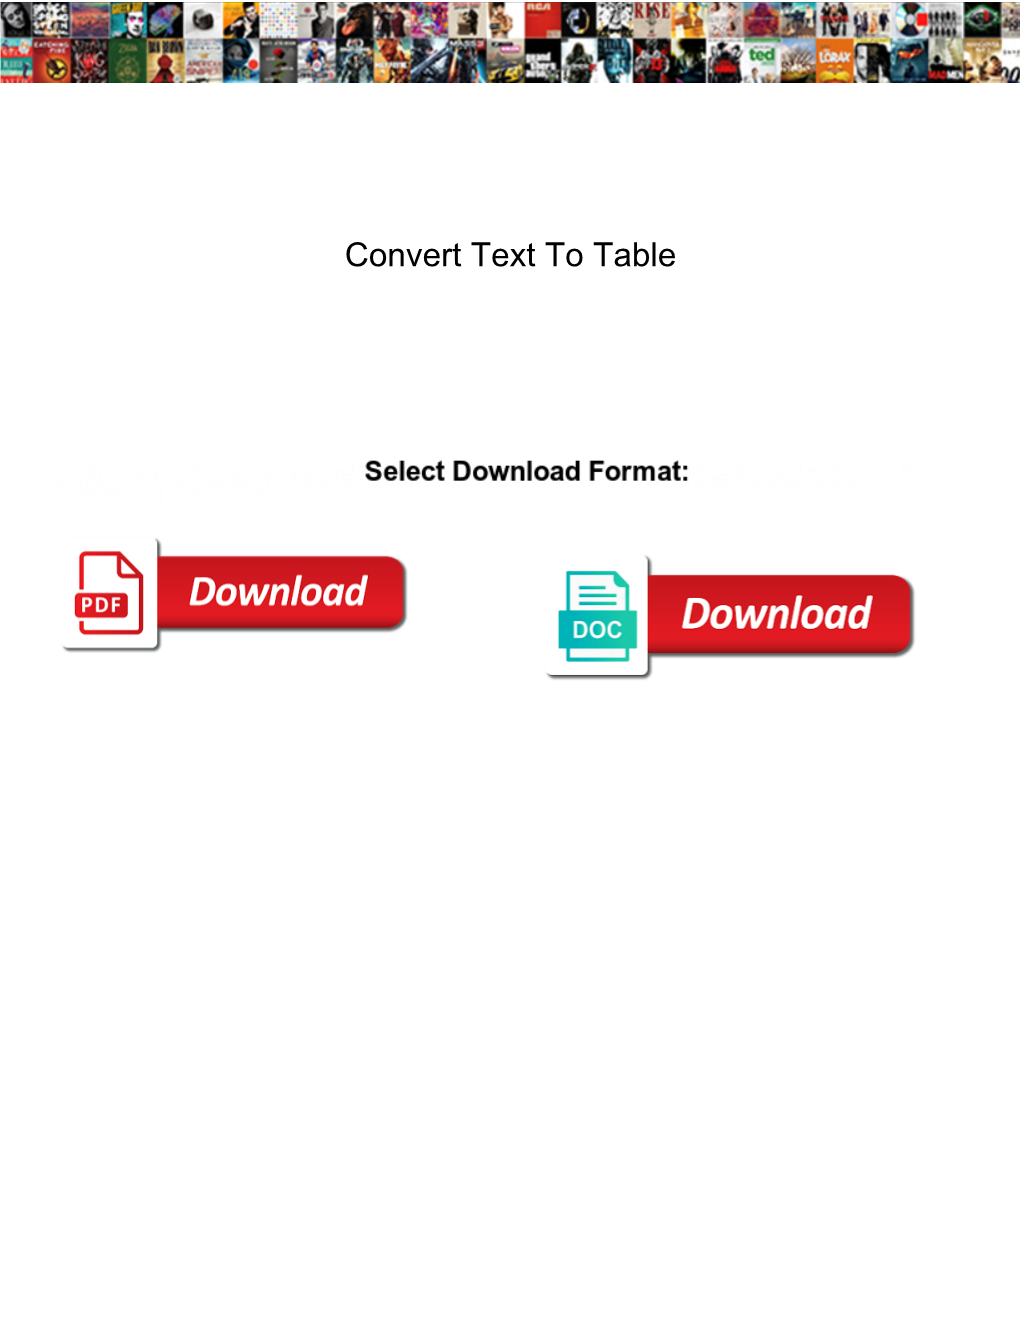 Convert Text to Table